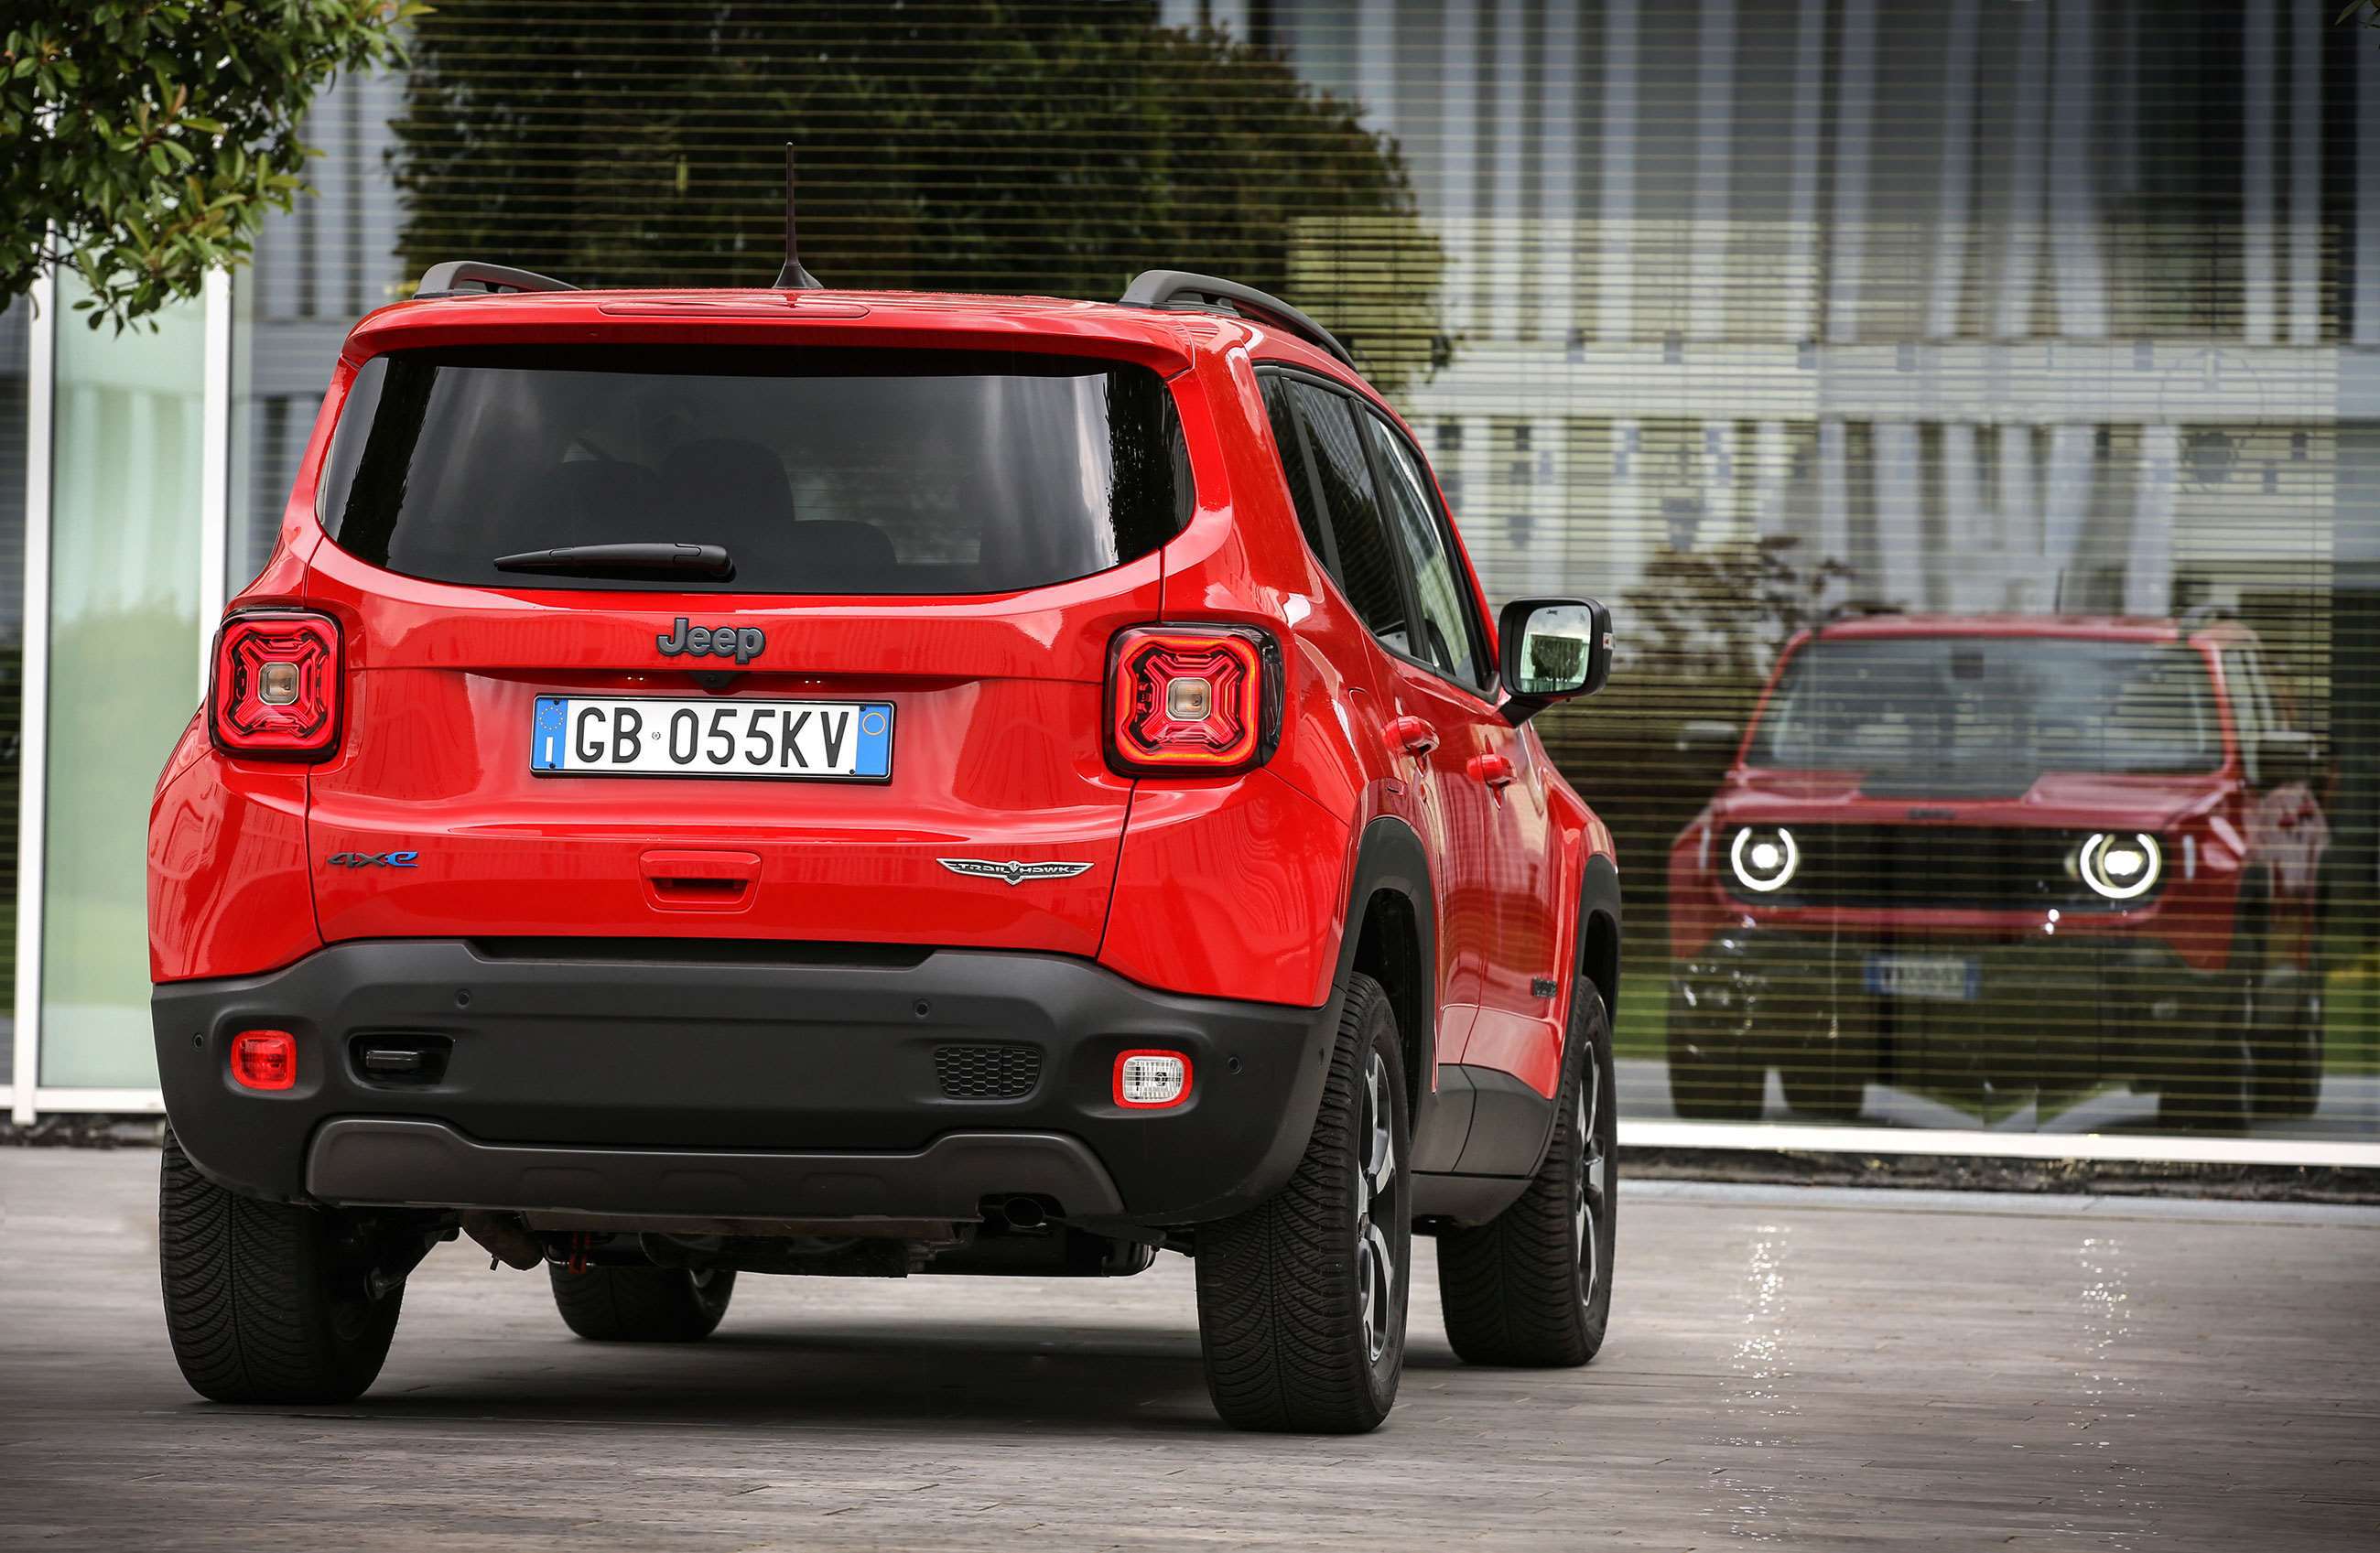 jeep-renegade-4xe-hybrid-specification-goodwood-25092020.jpg